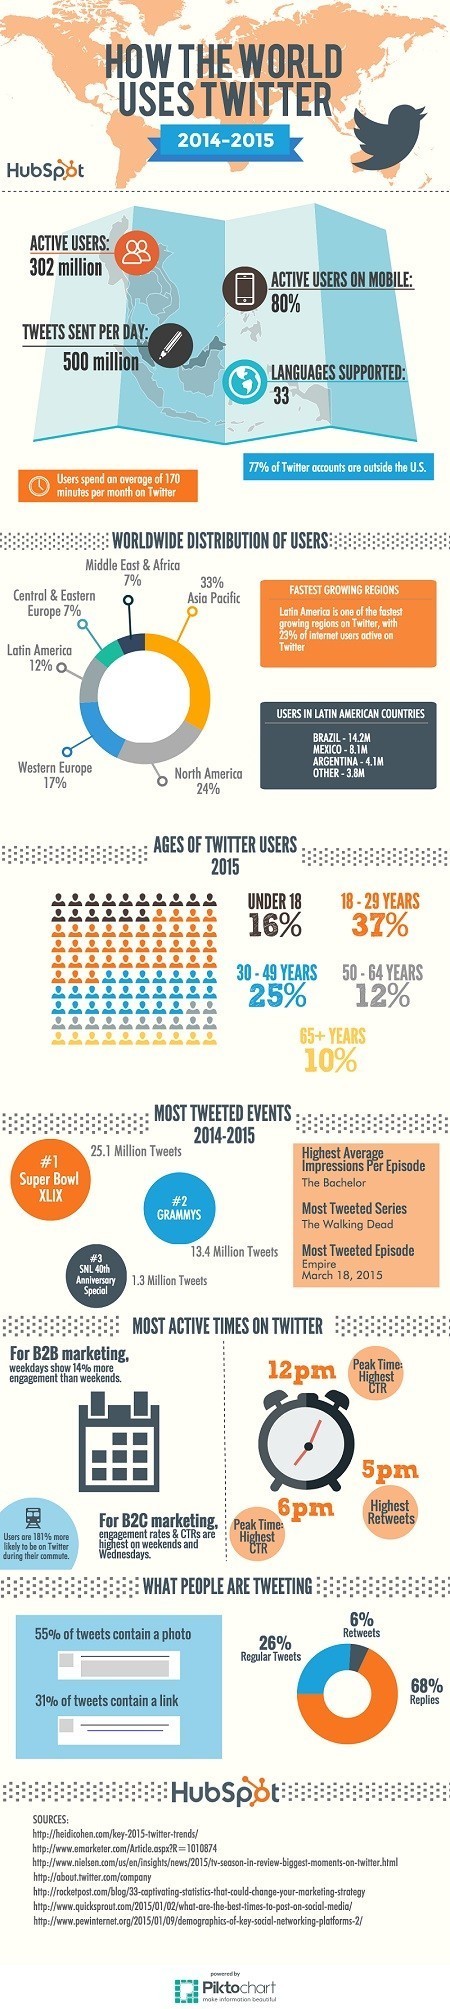 How the World Uses Twitter [Infographic] | Geeks | Scoop.it